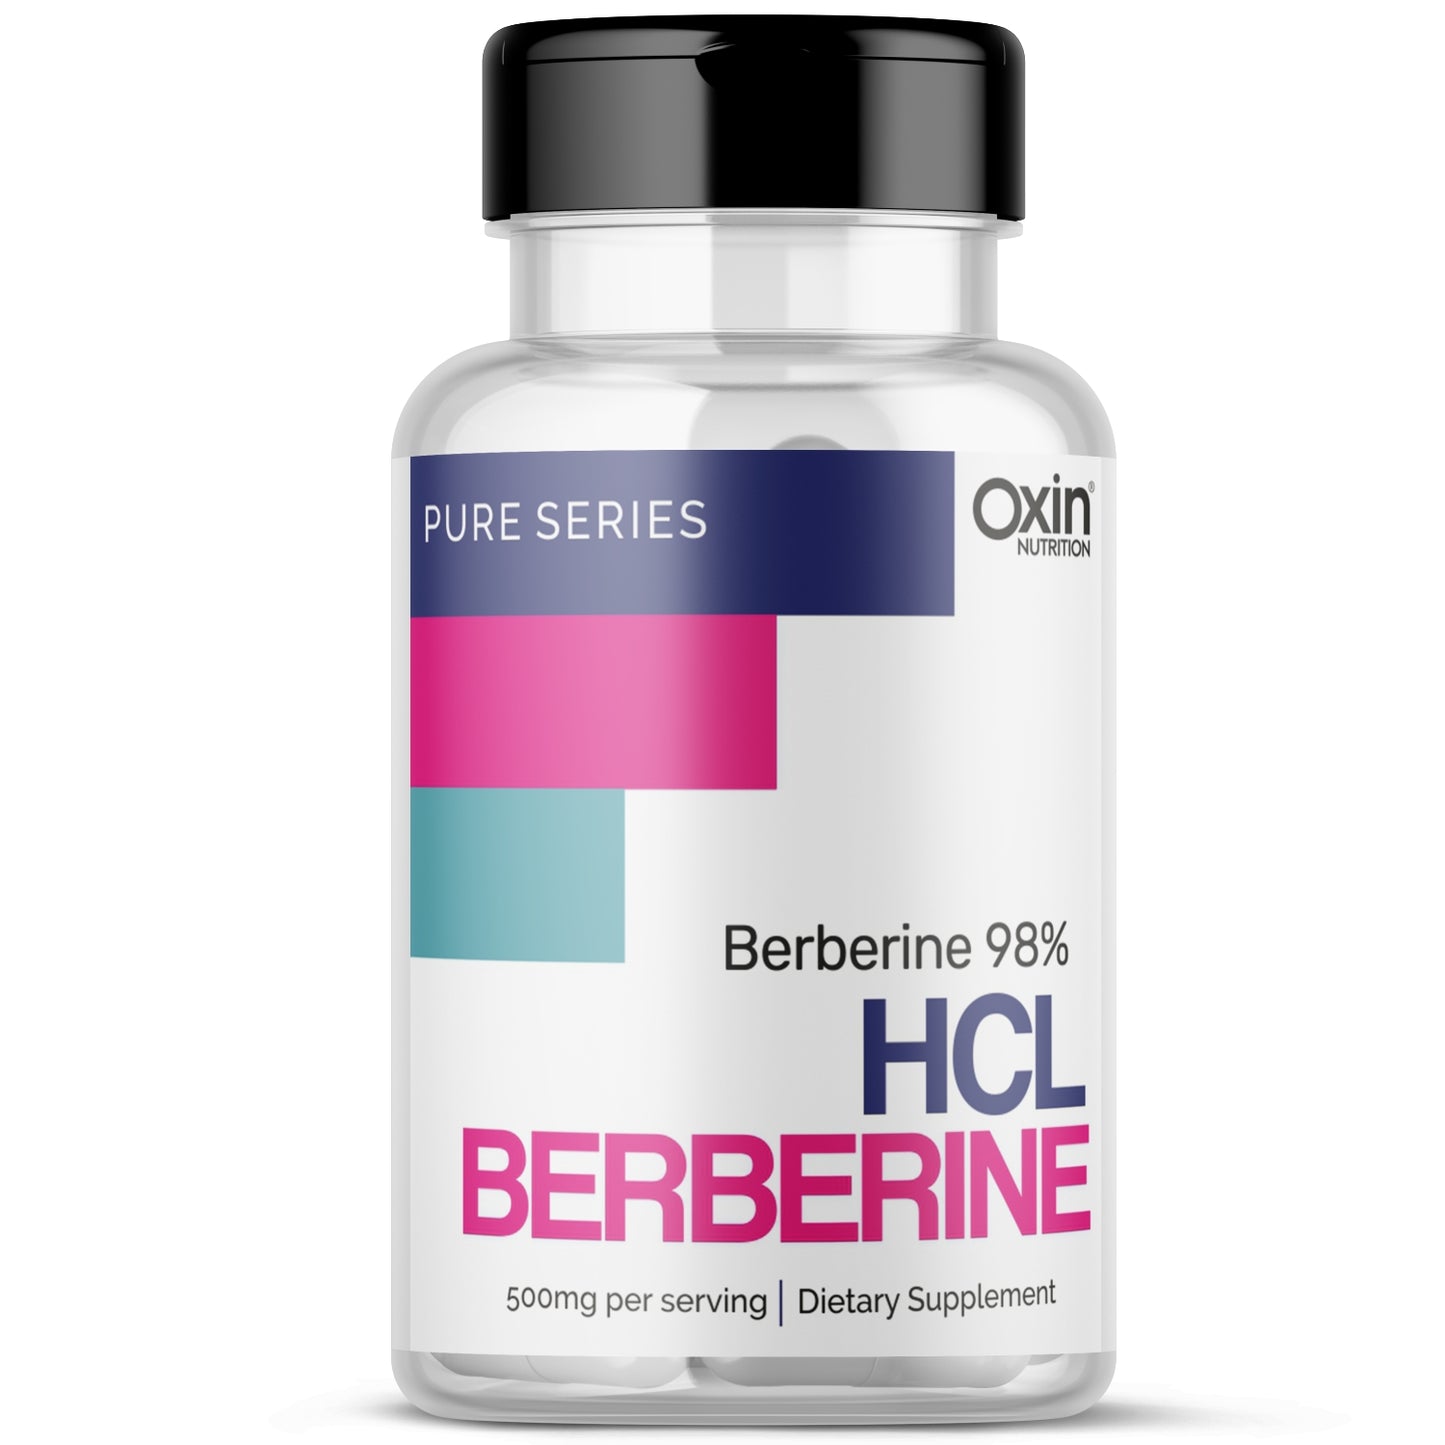 Oxin Nutrition®  Berberine HCL 500mg Capsules - 98% Highly Purified and Bioavailable Supplement - 82:1 Concentrated Formula